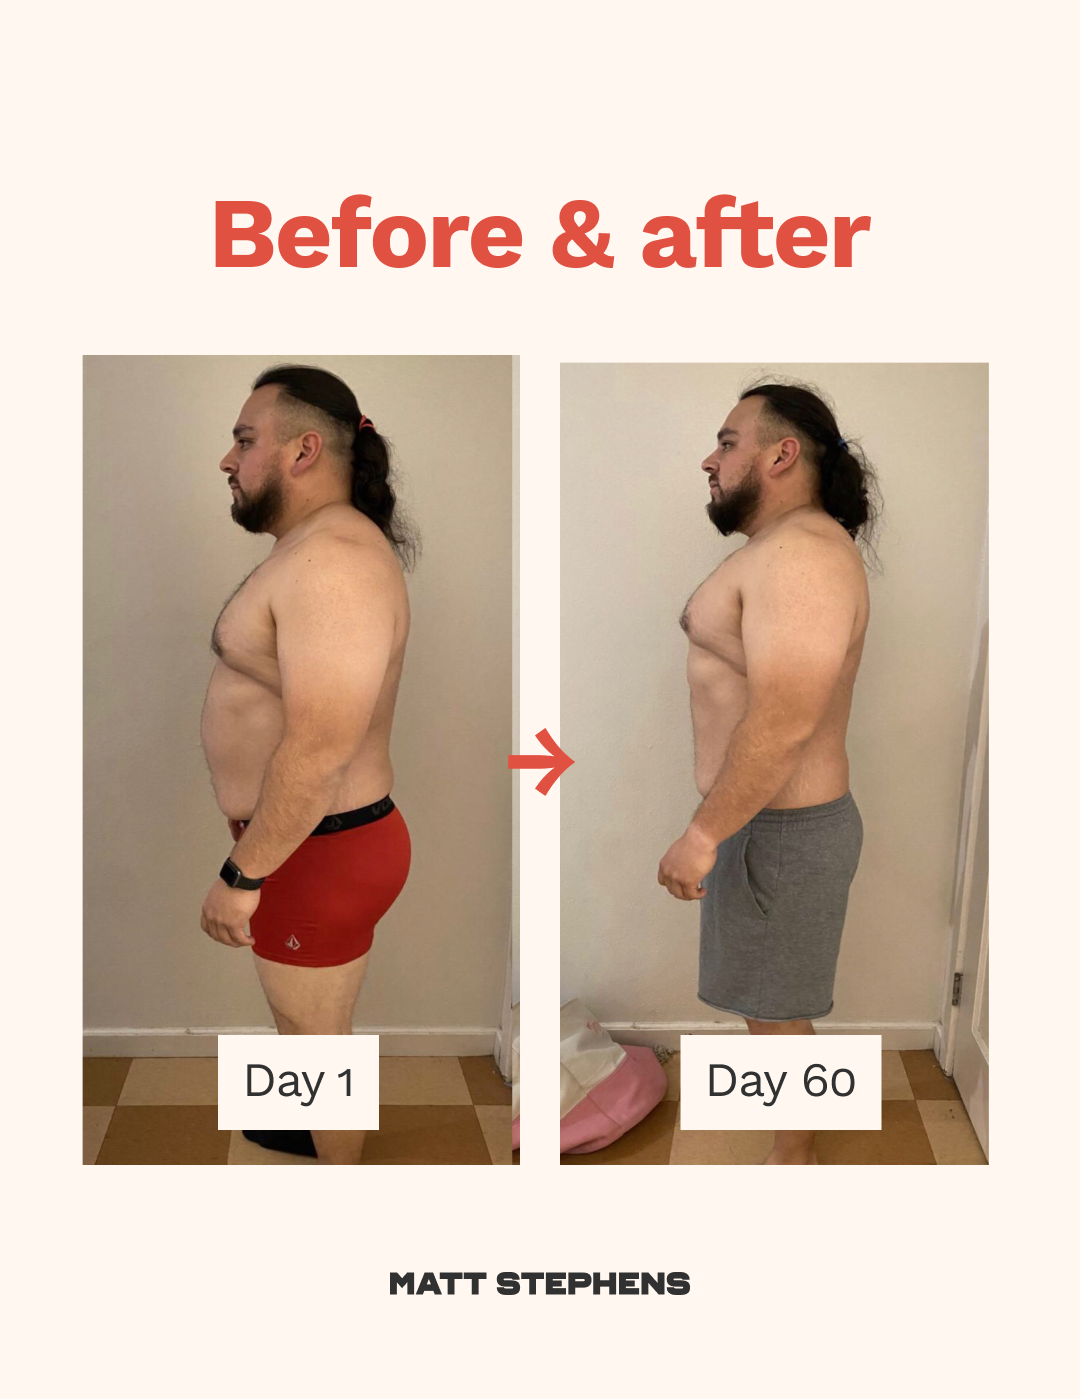 Ricky, 29, Construction, Lost 15 lbs in 60 days!